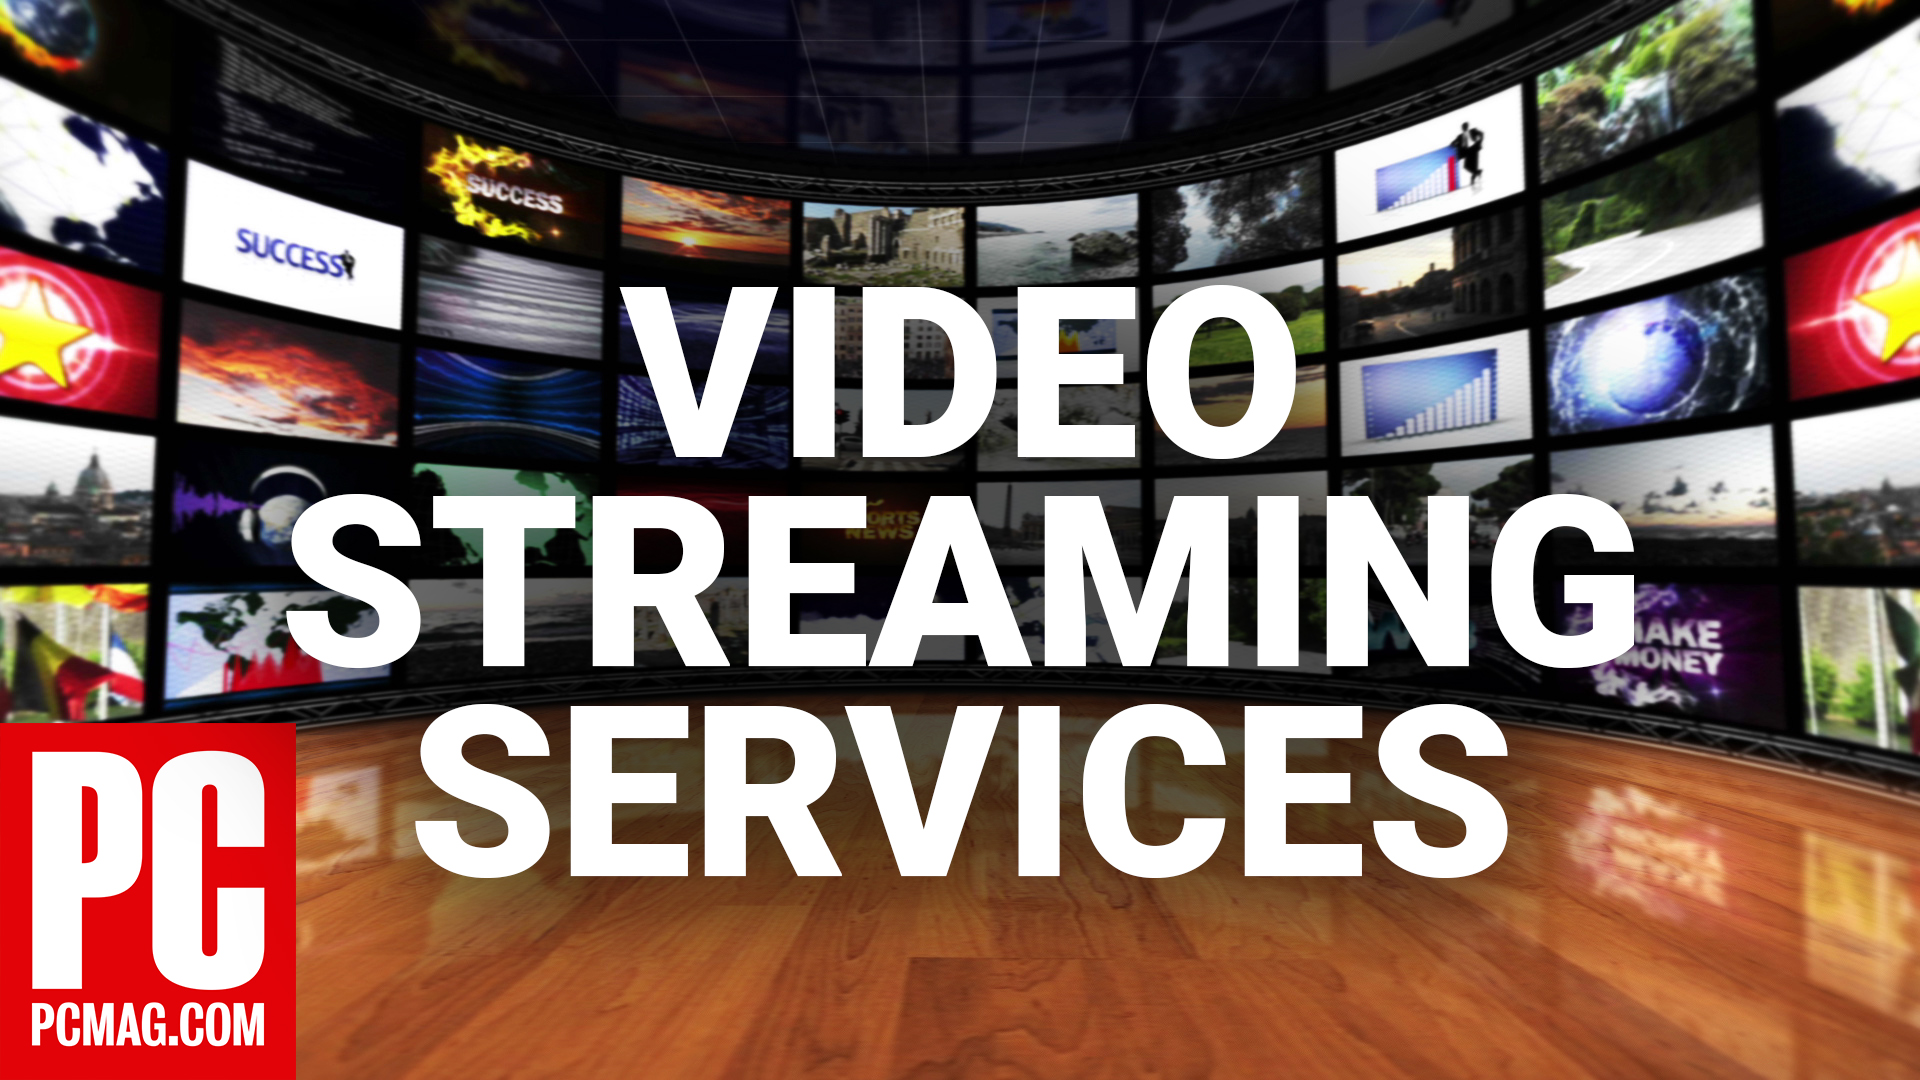 Video Streaming Services: What You Should Know